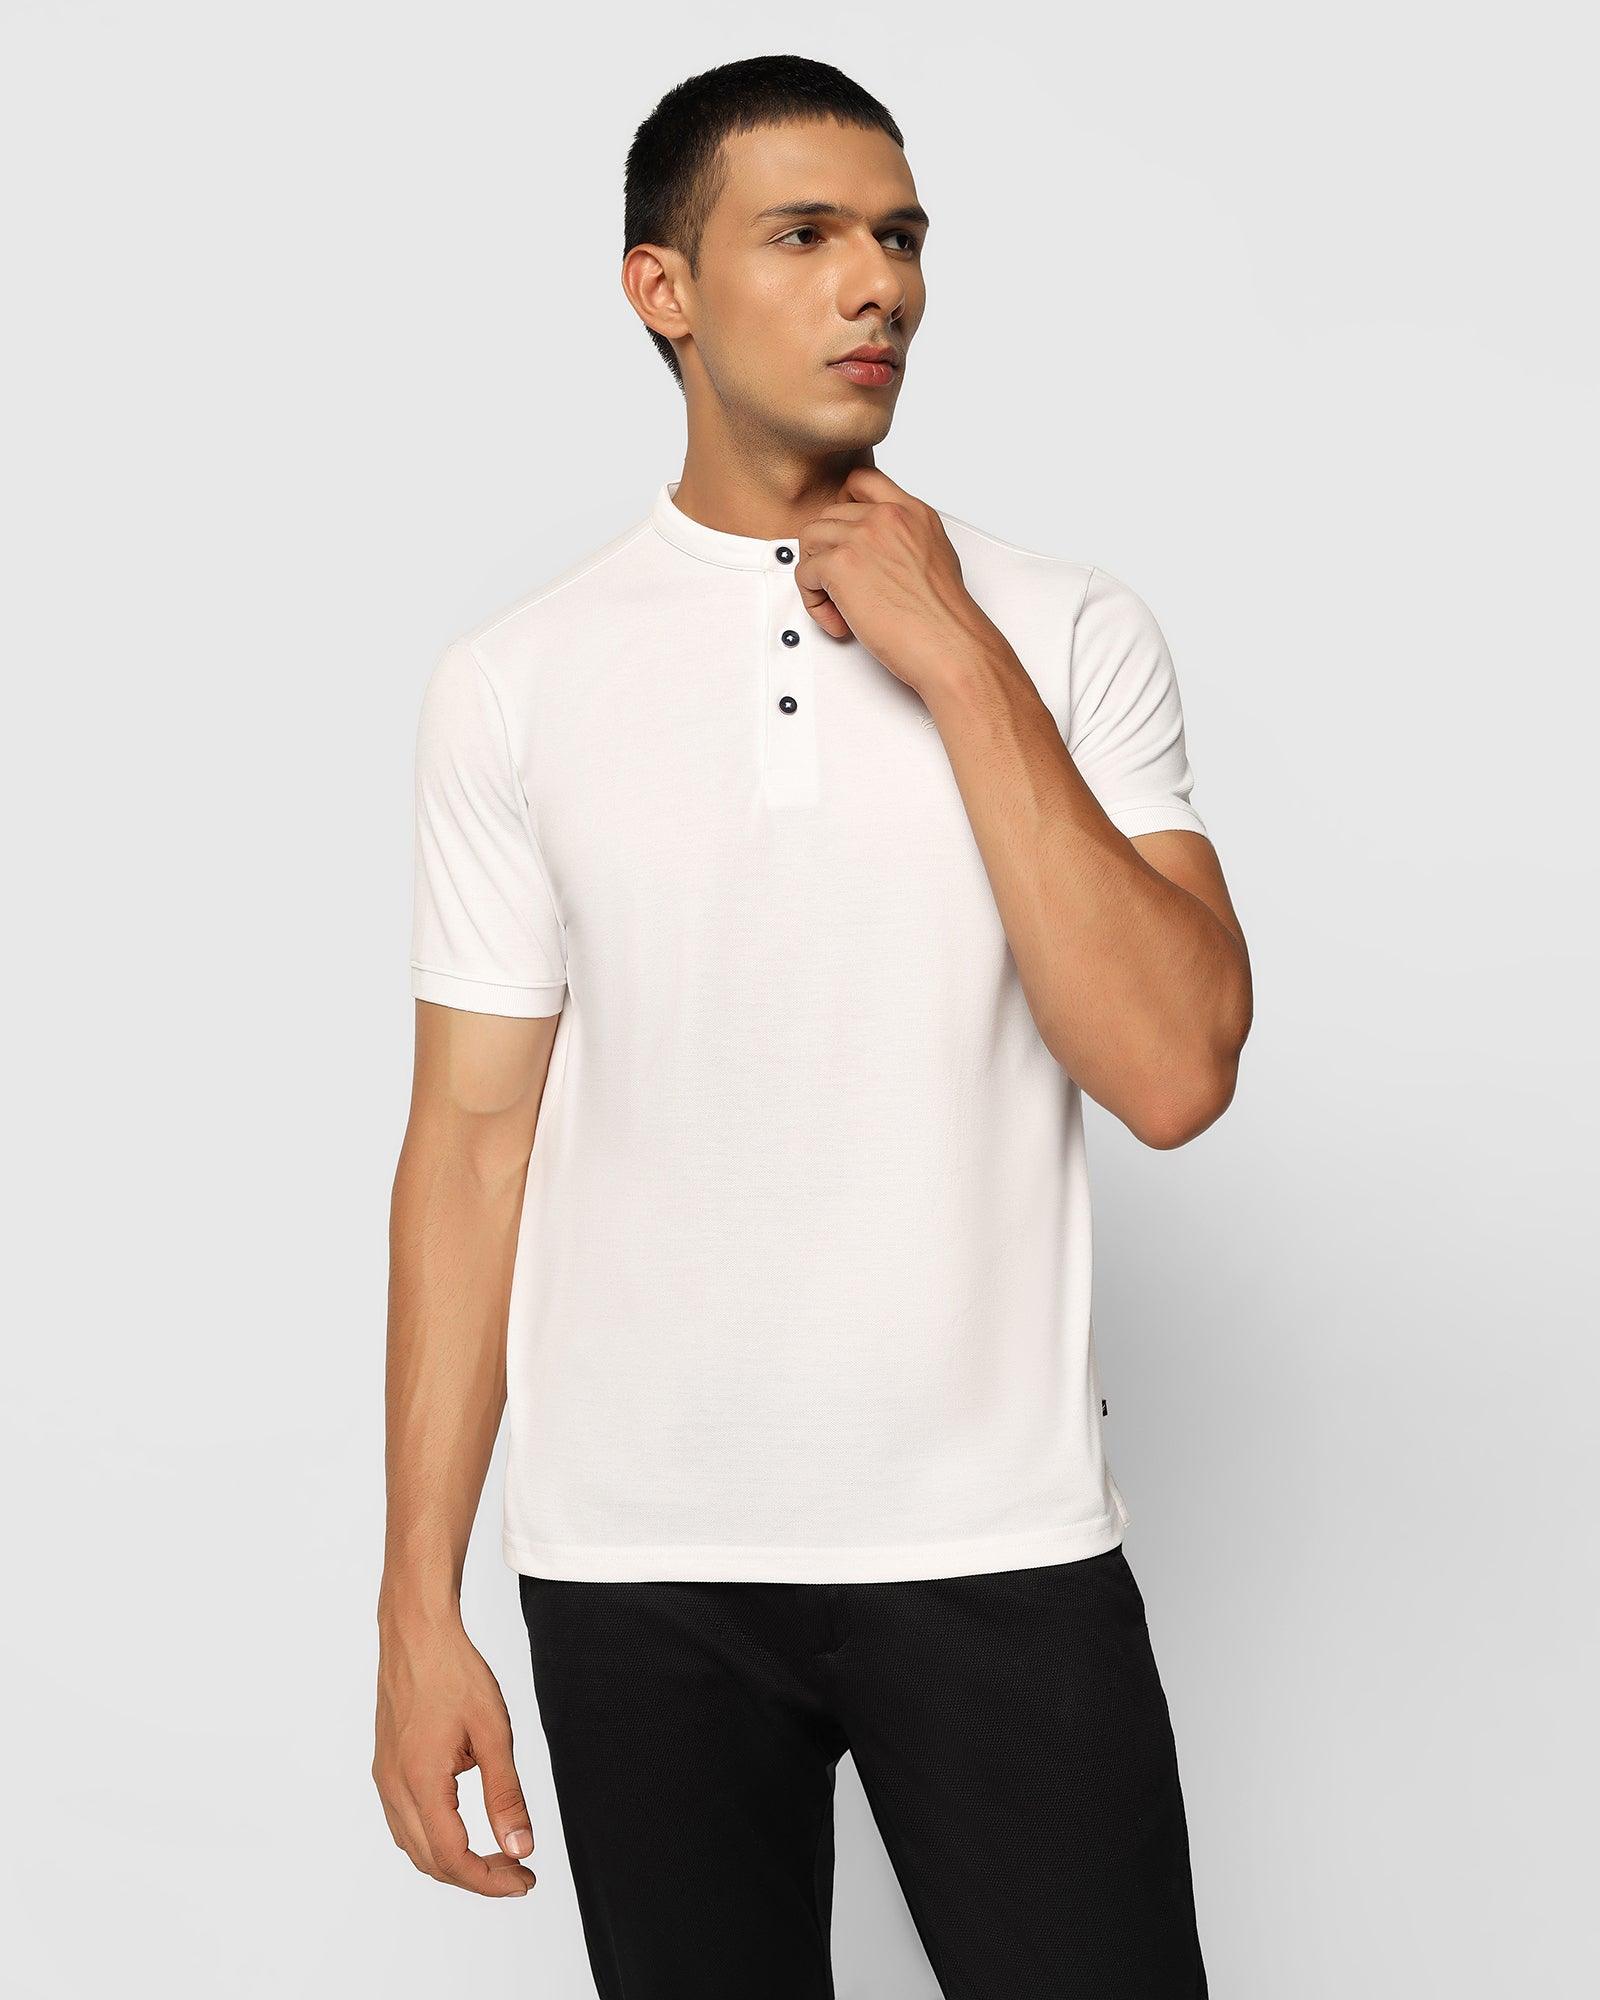 Henley Collar White Solid T-Shirt - Kell